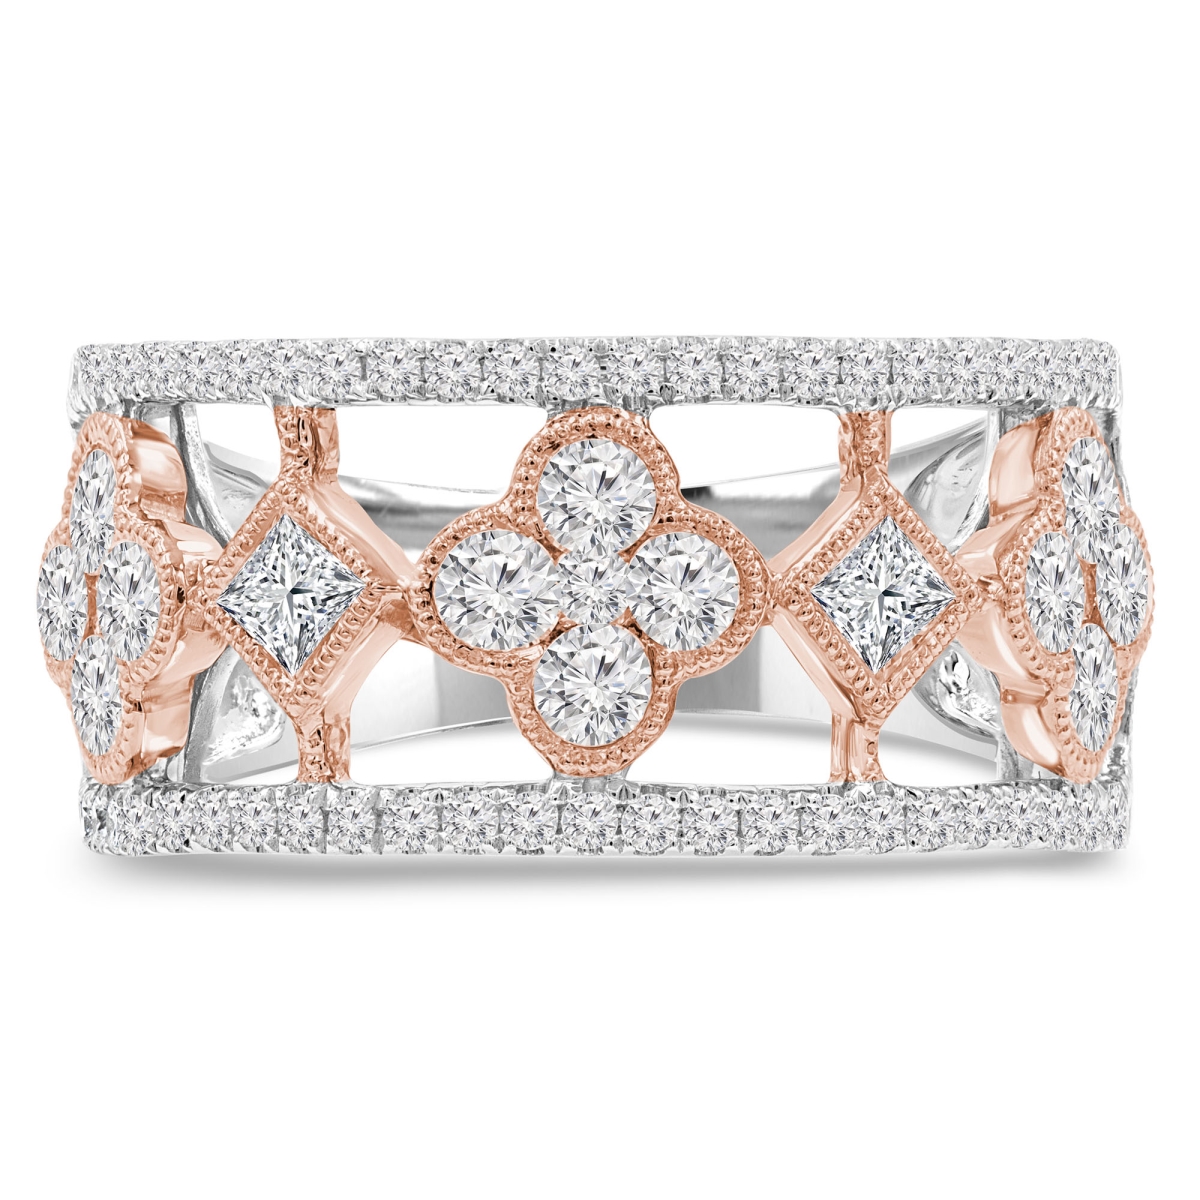 Picture of Majesty Diamonds MDR210138-5 1.13 CTW Princess Diamond Cocktail Ring in 14K Two-Tone Gold - Size 5